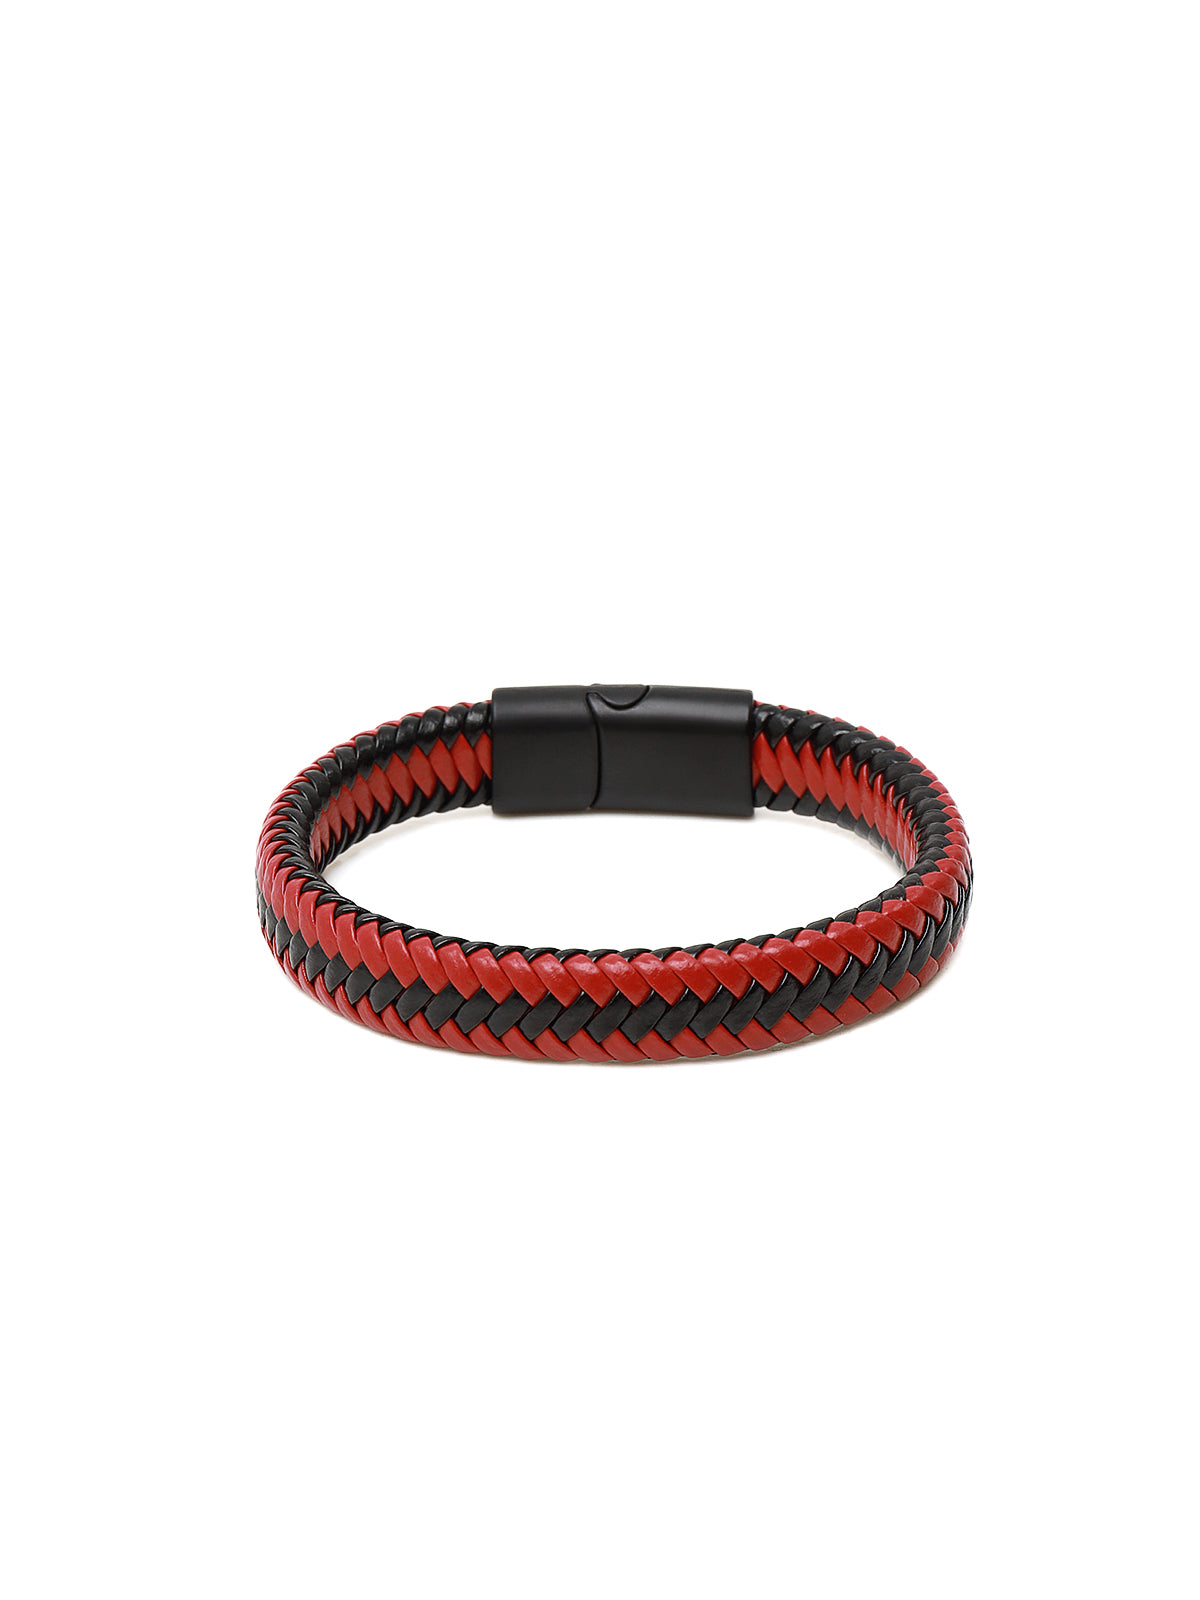 Red Leather Bracelet - FABR24-019